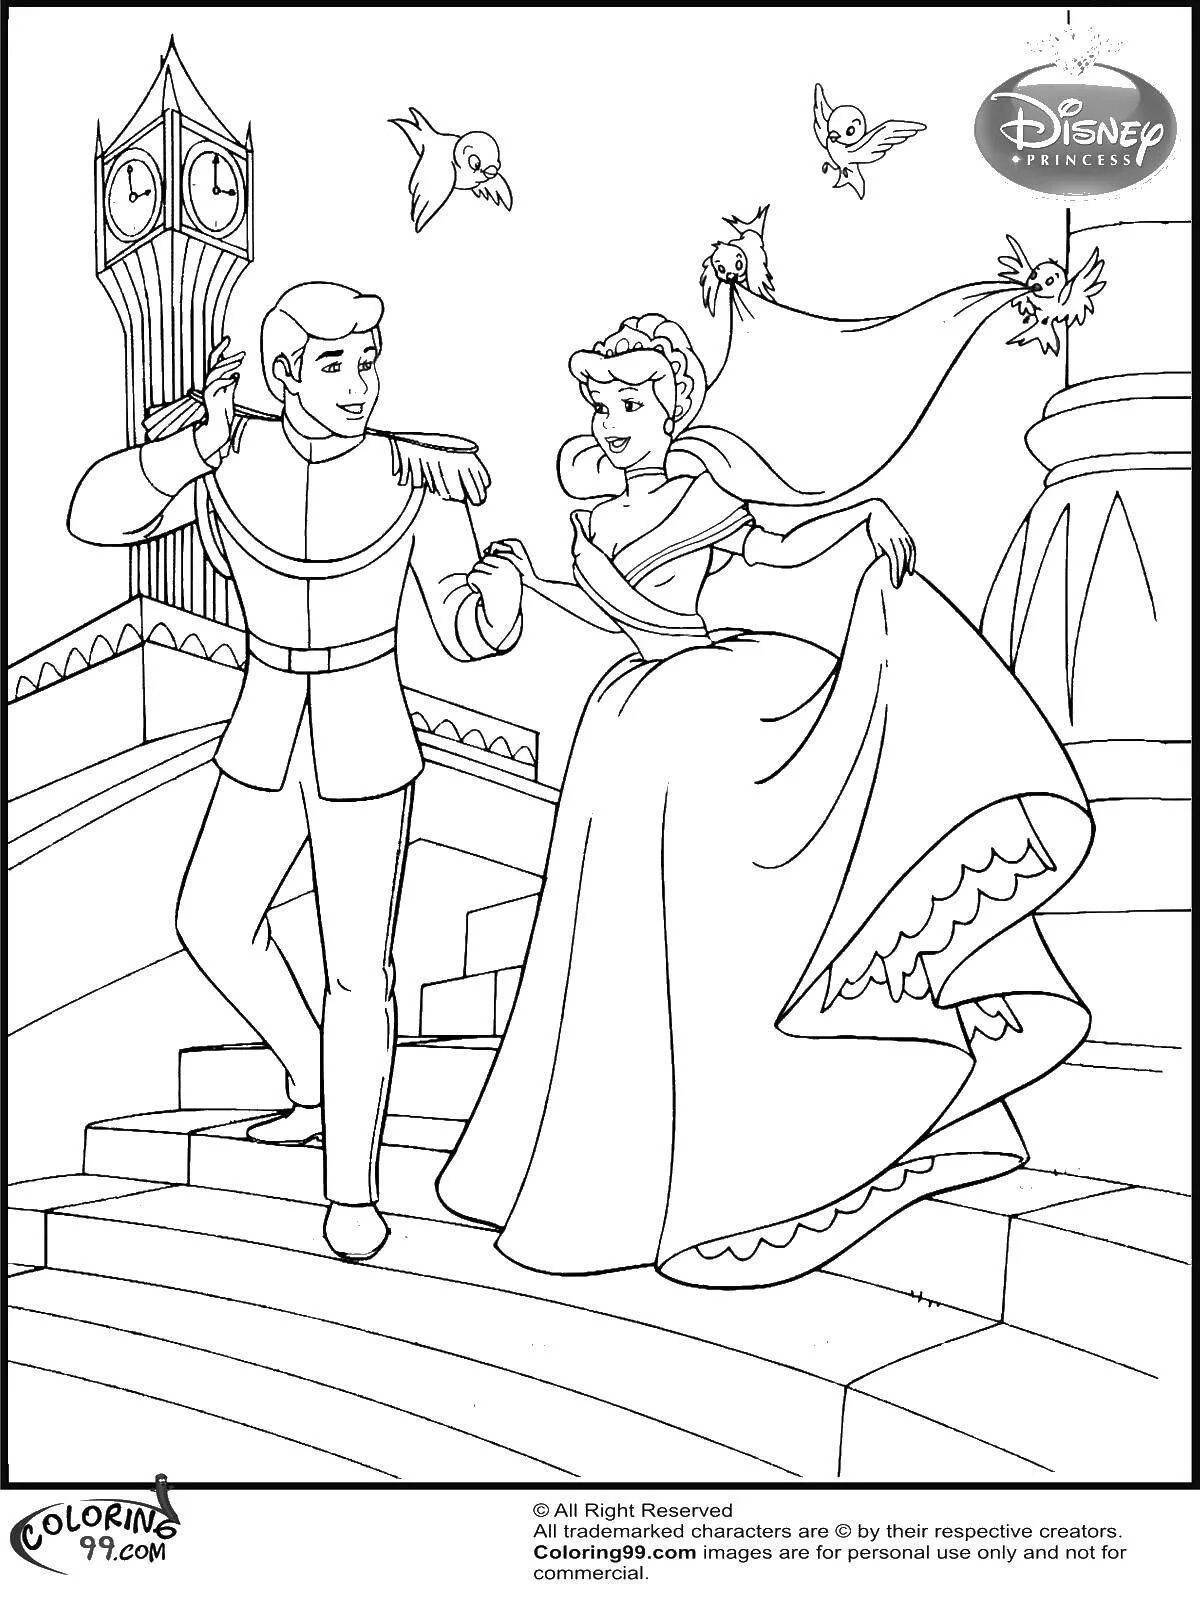 Princess and prince coloring book for kids